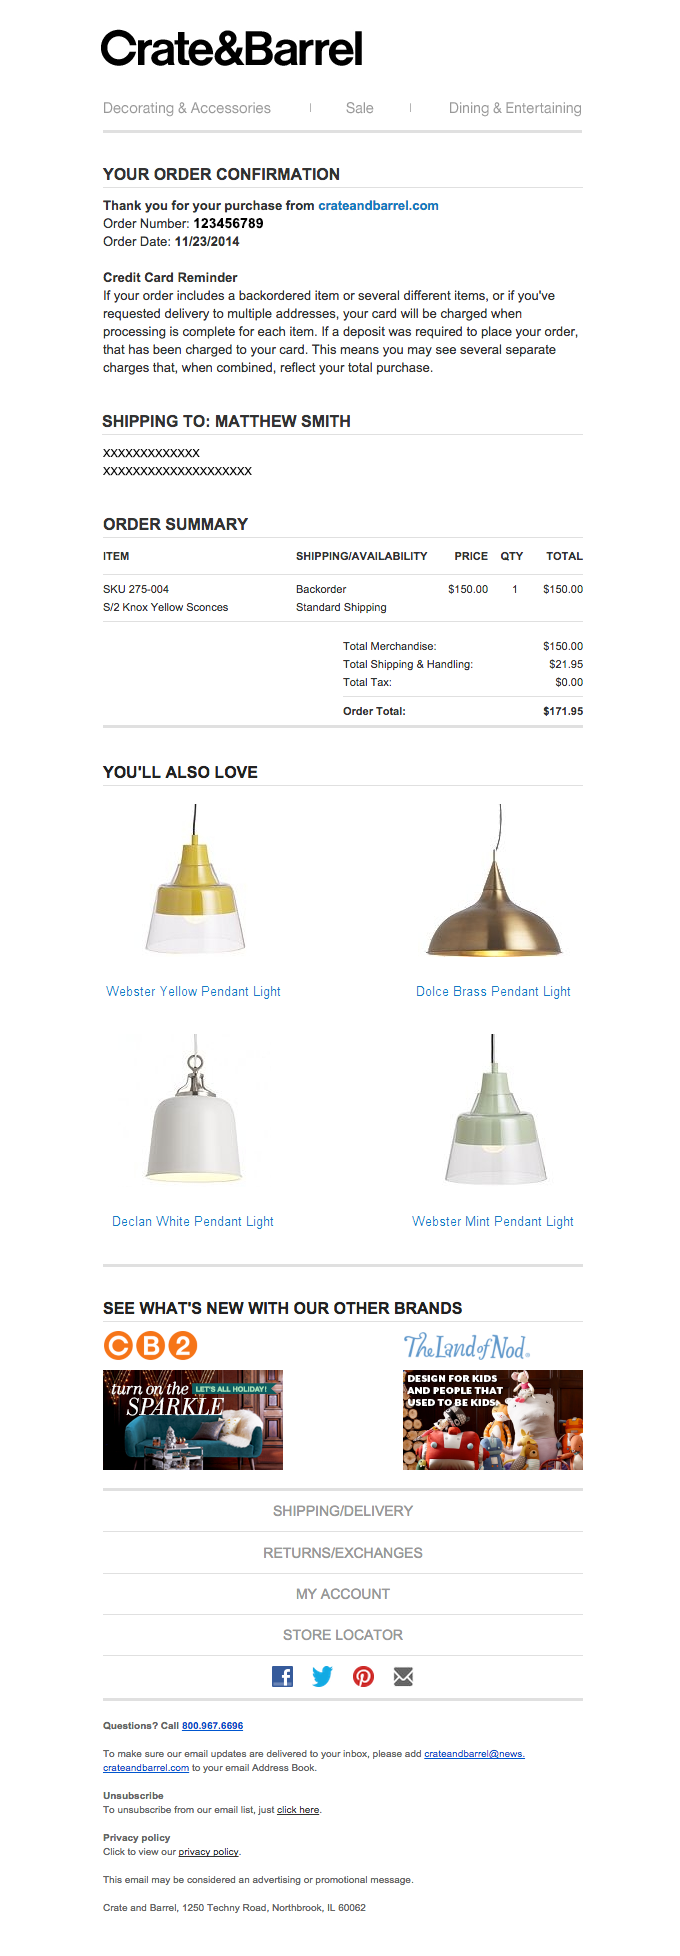 email from Crate and Barrel